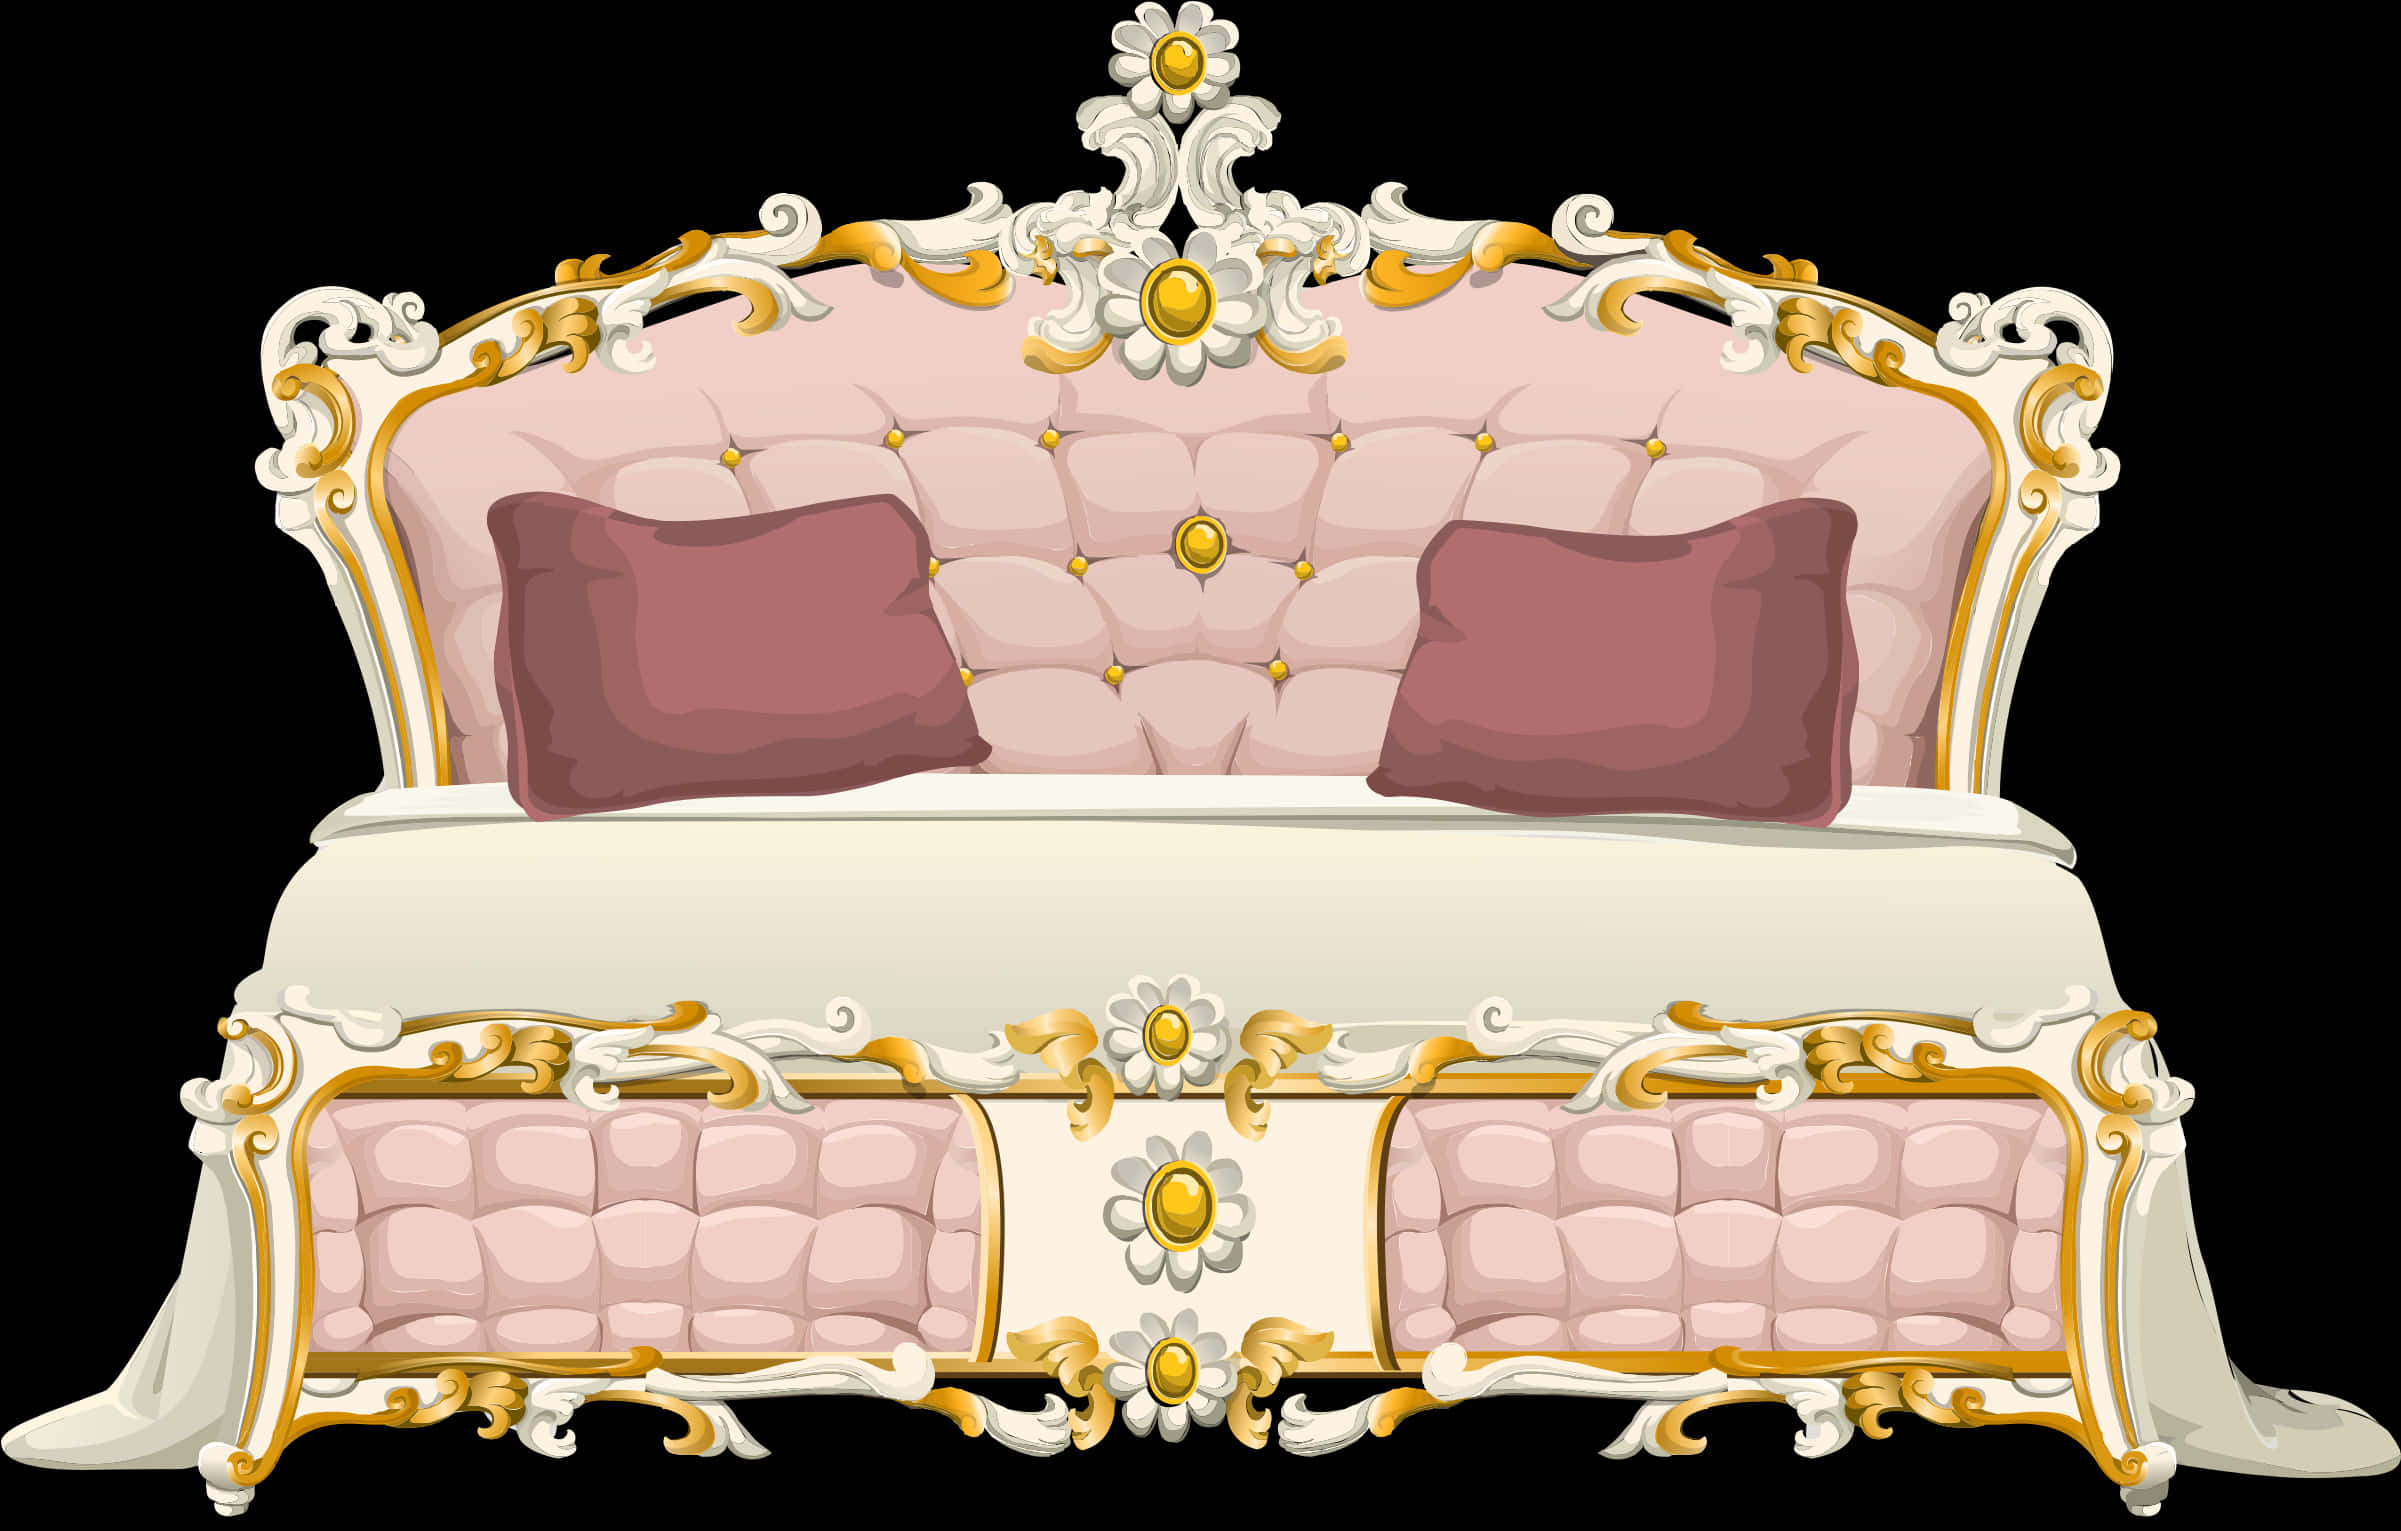 A Pink And Gold Bed